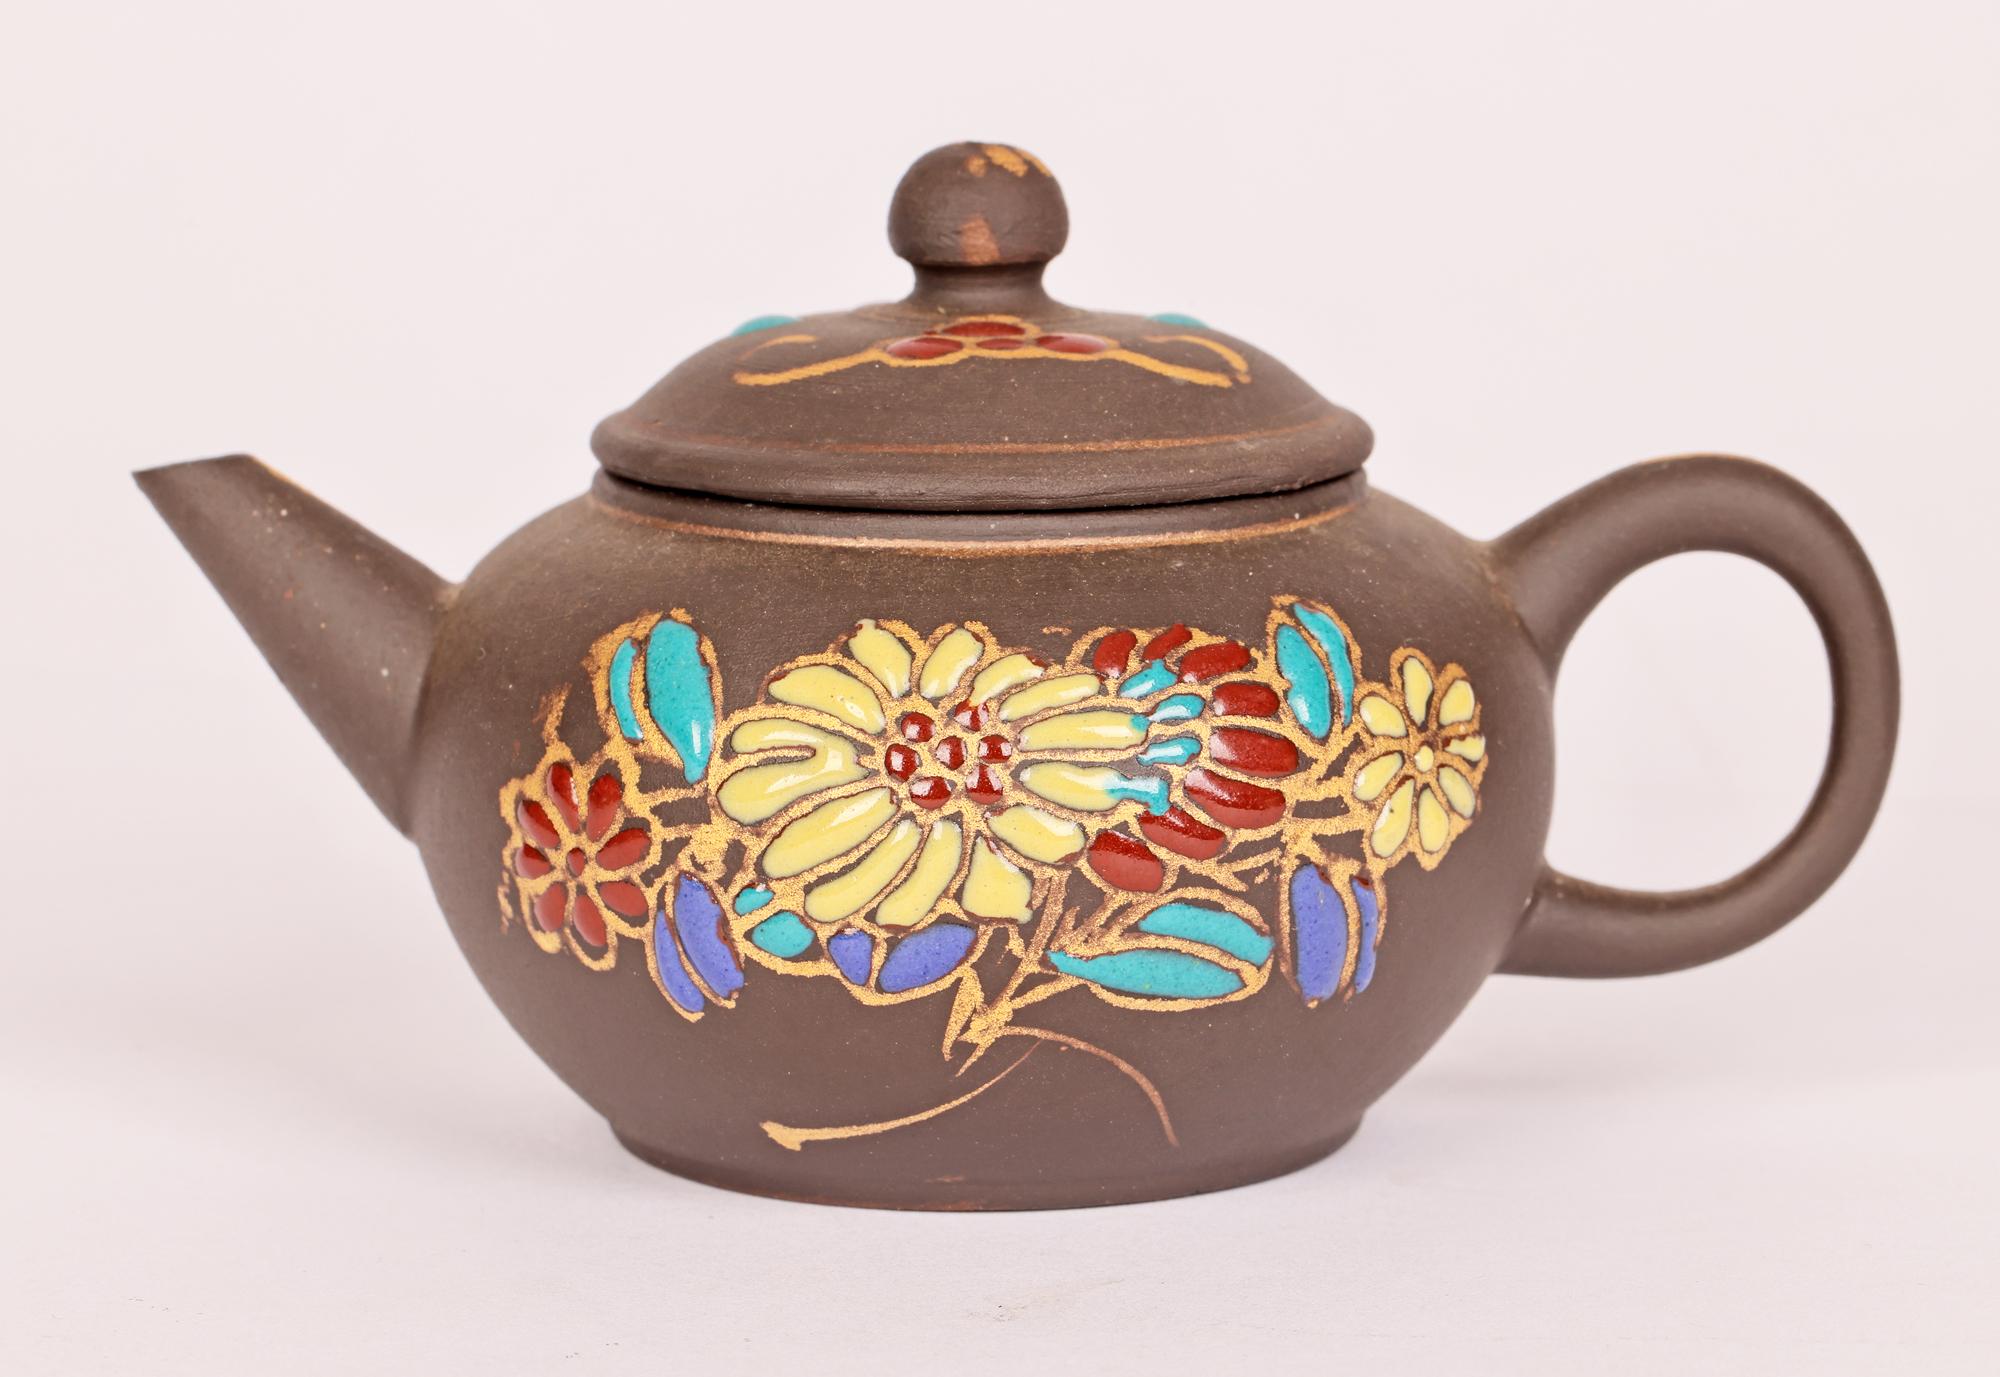 20th Century Chinese Miniature Yixing Teapot with Applied Floral Enamel Designs  For Sale